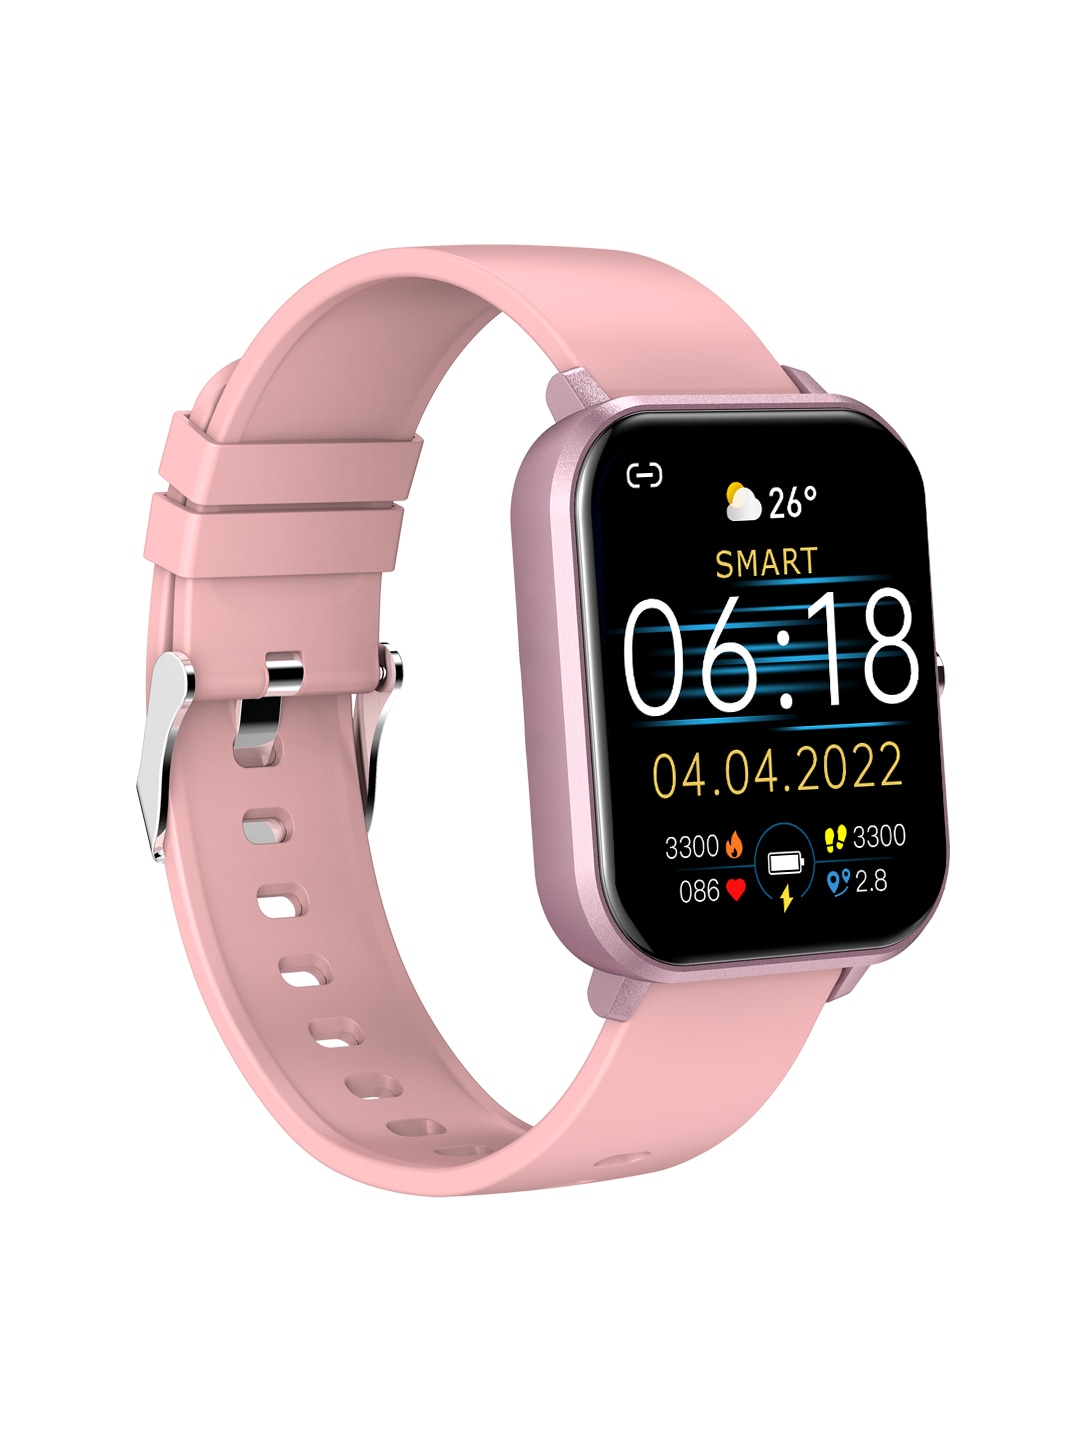 pTron Pulsefit Pro Bluetooth Calling Smartwatch with 1.69" Full Touch Screen - Pink Price in India